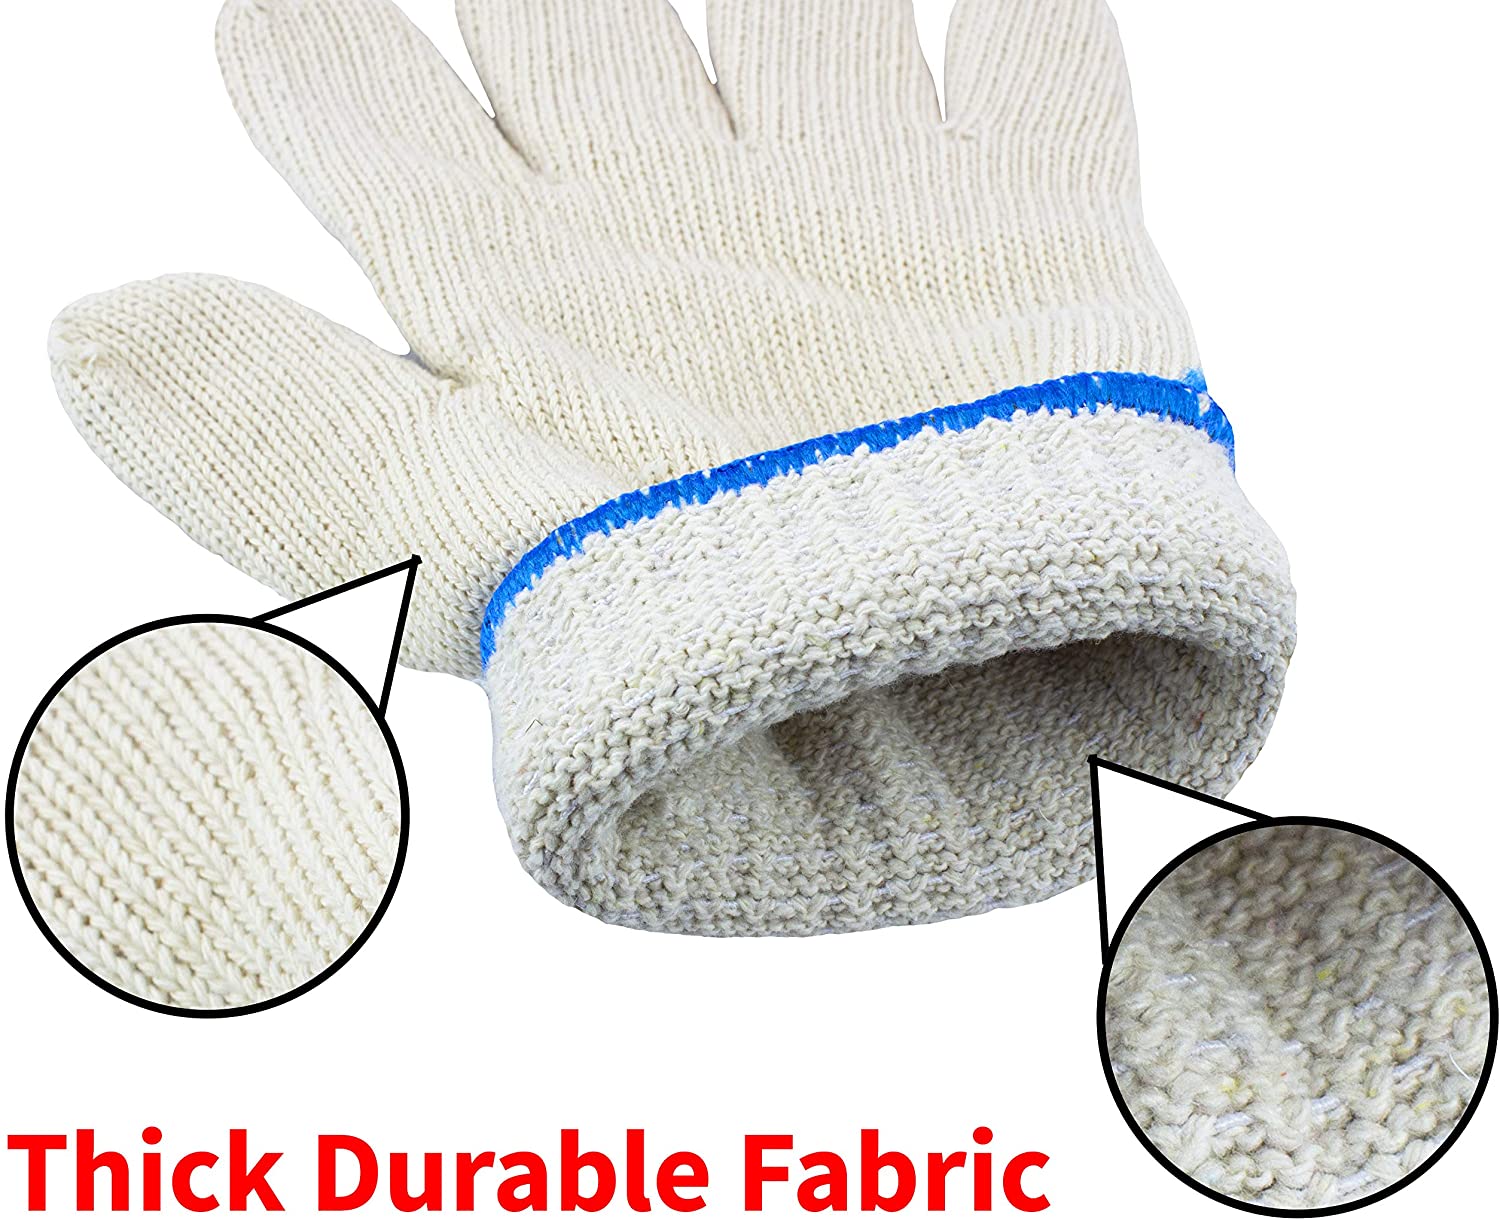 A detail picture of the glove showing the durable fabric used to protect you from the flames